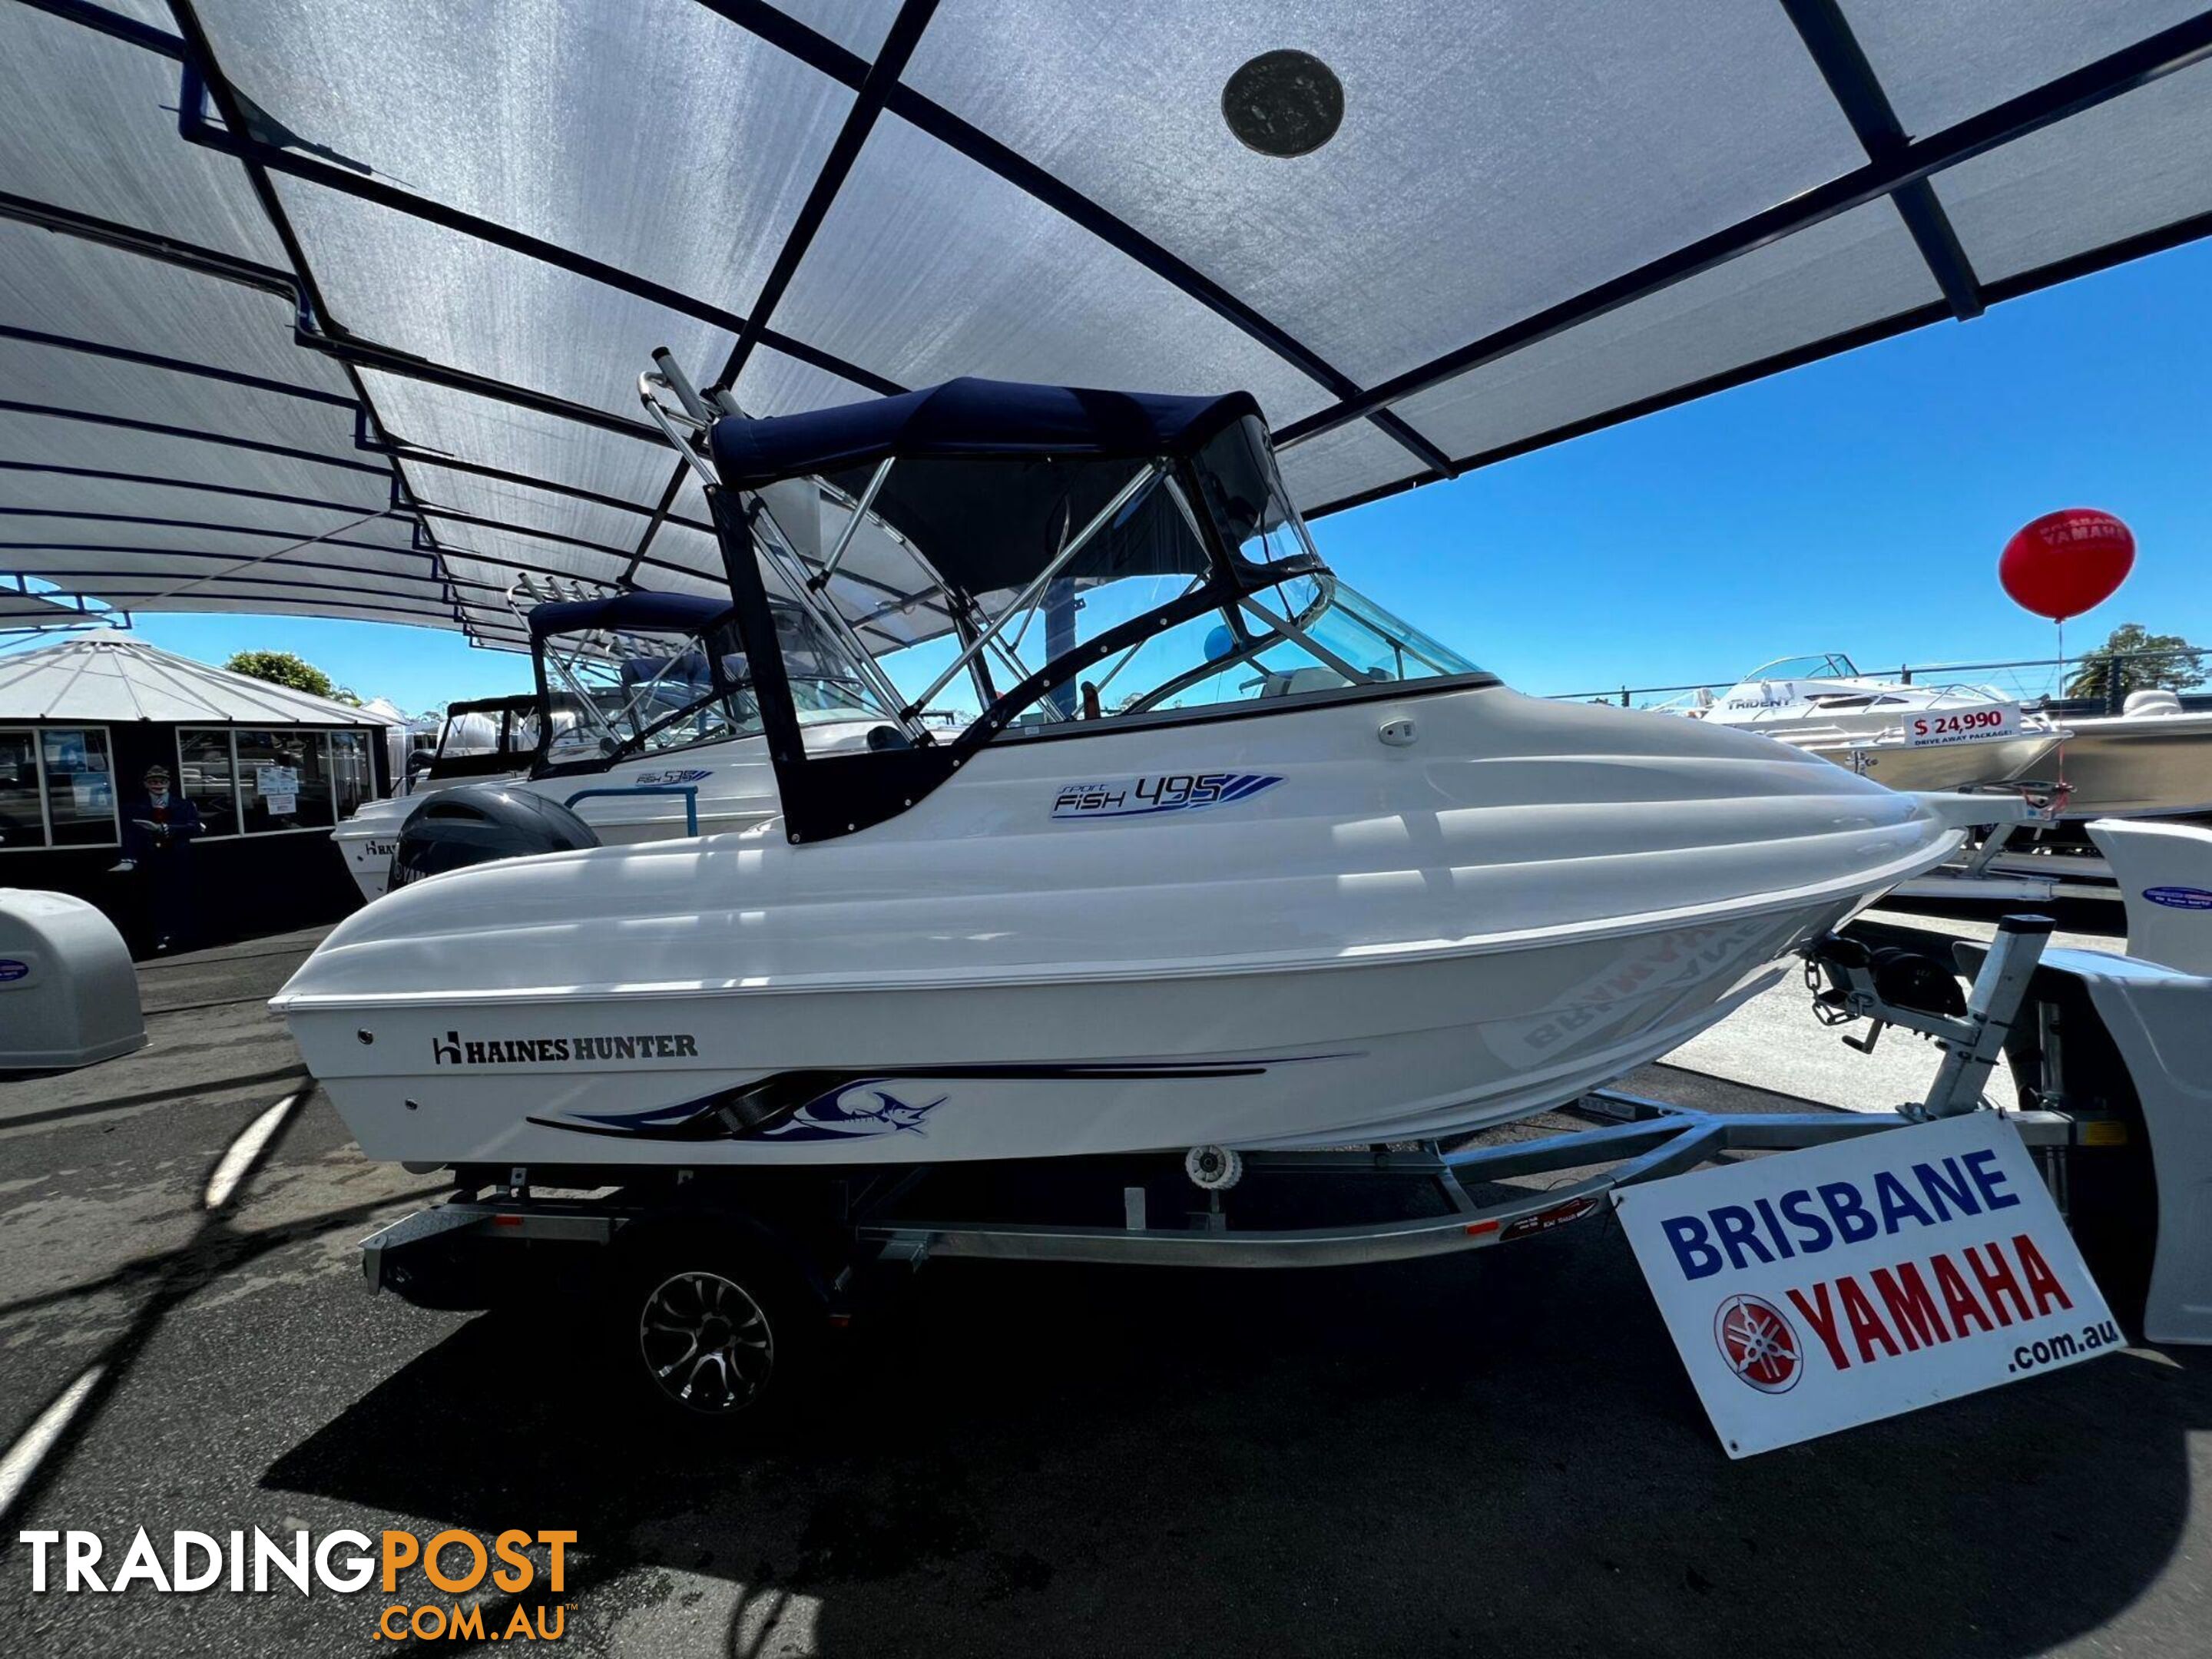 Haines Hunter 495 Sport Fish + Yamaha F90HP 4-Stroke - STOCK BOAT for sale online prices